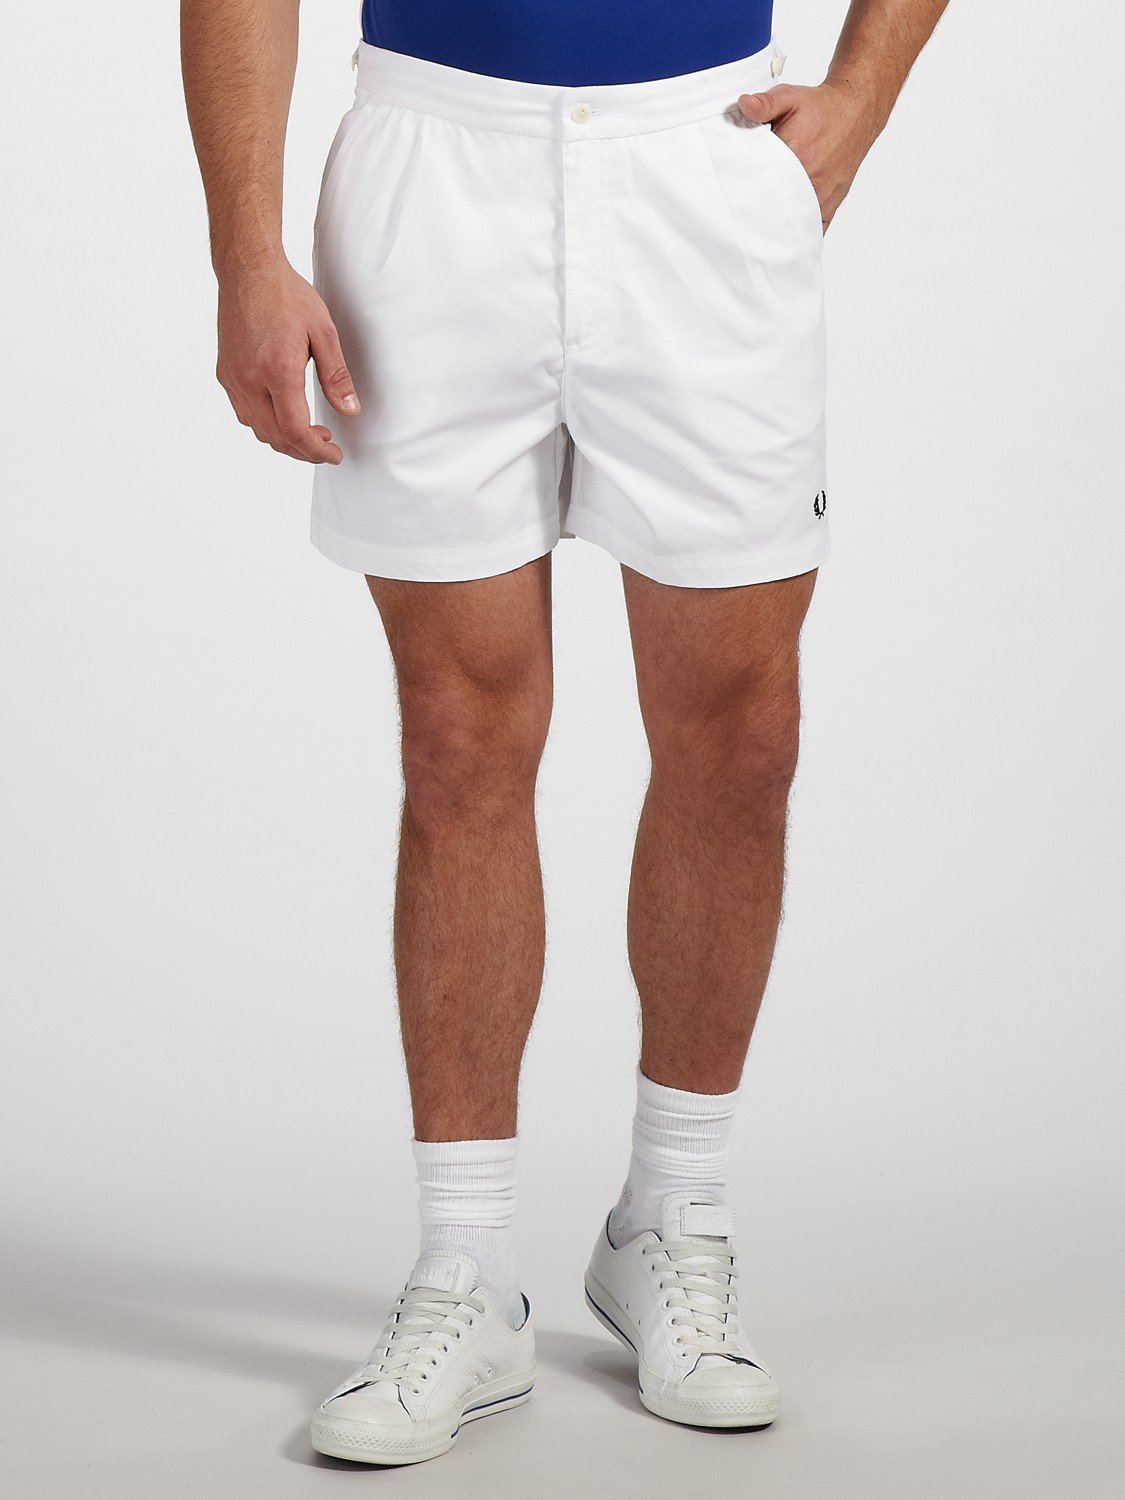 Fred Perry Tailored Tennis Shorts in White for Men | Lyst UK